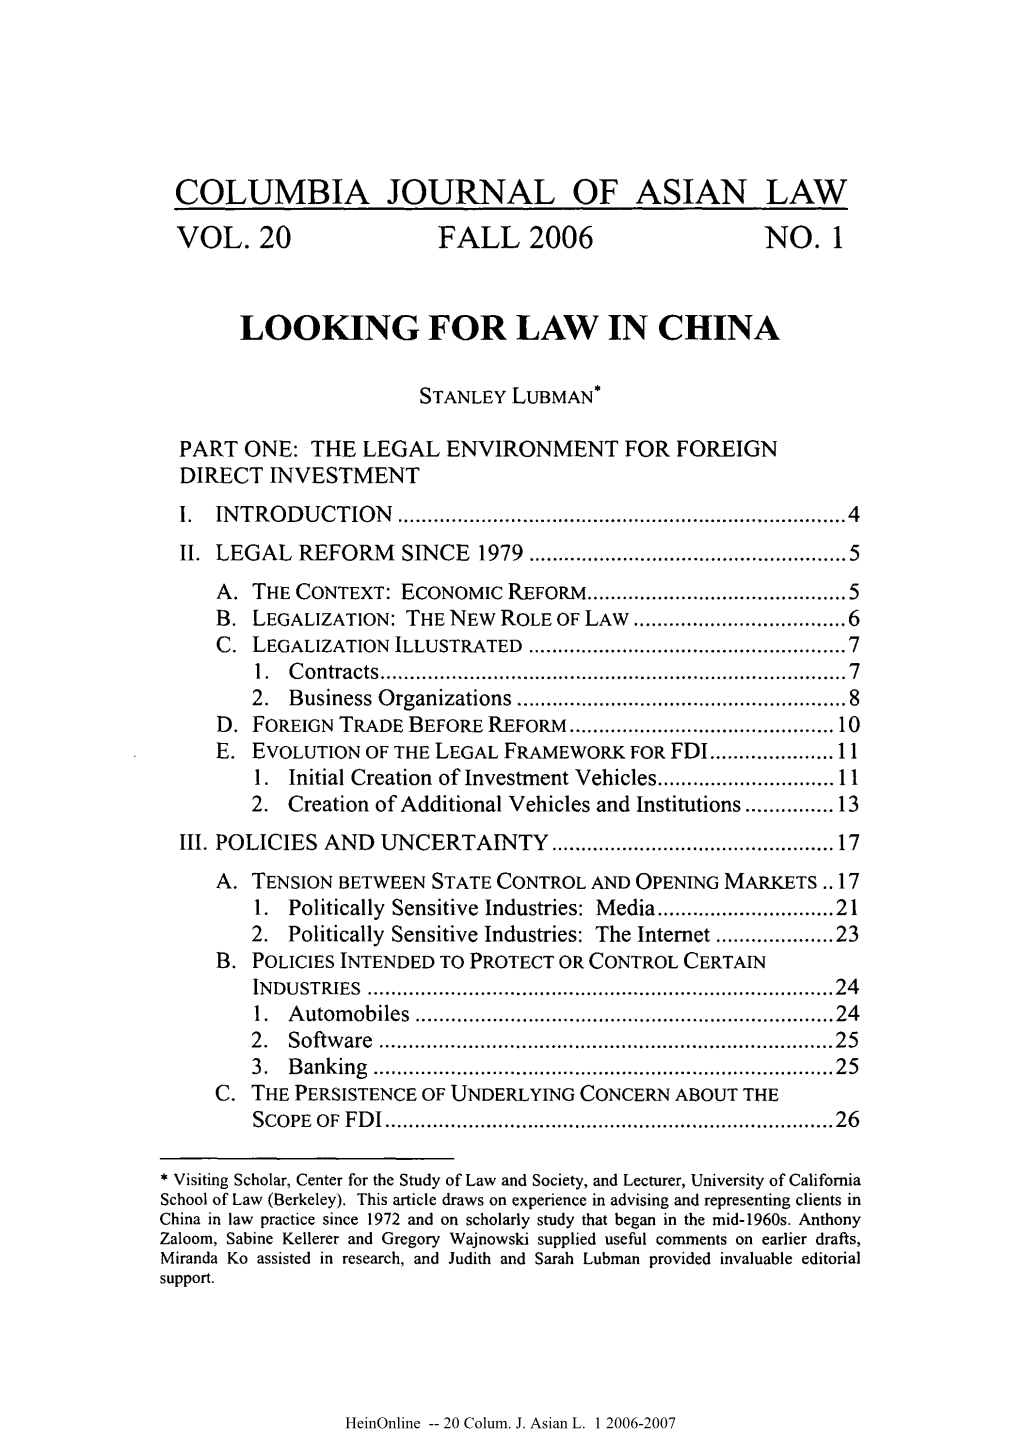 Columbia Journal of Asian Law Looking for Law in China